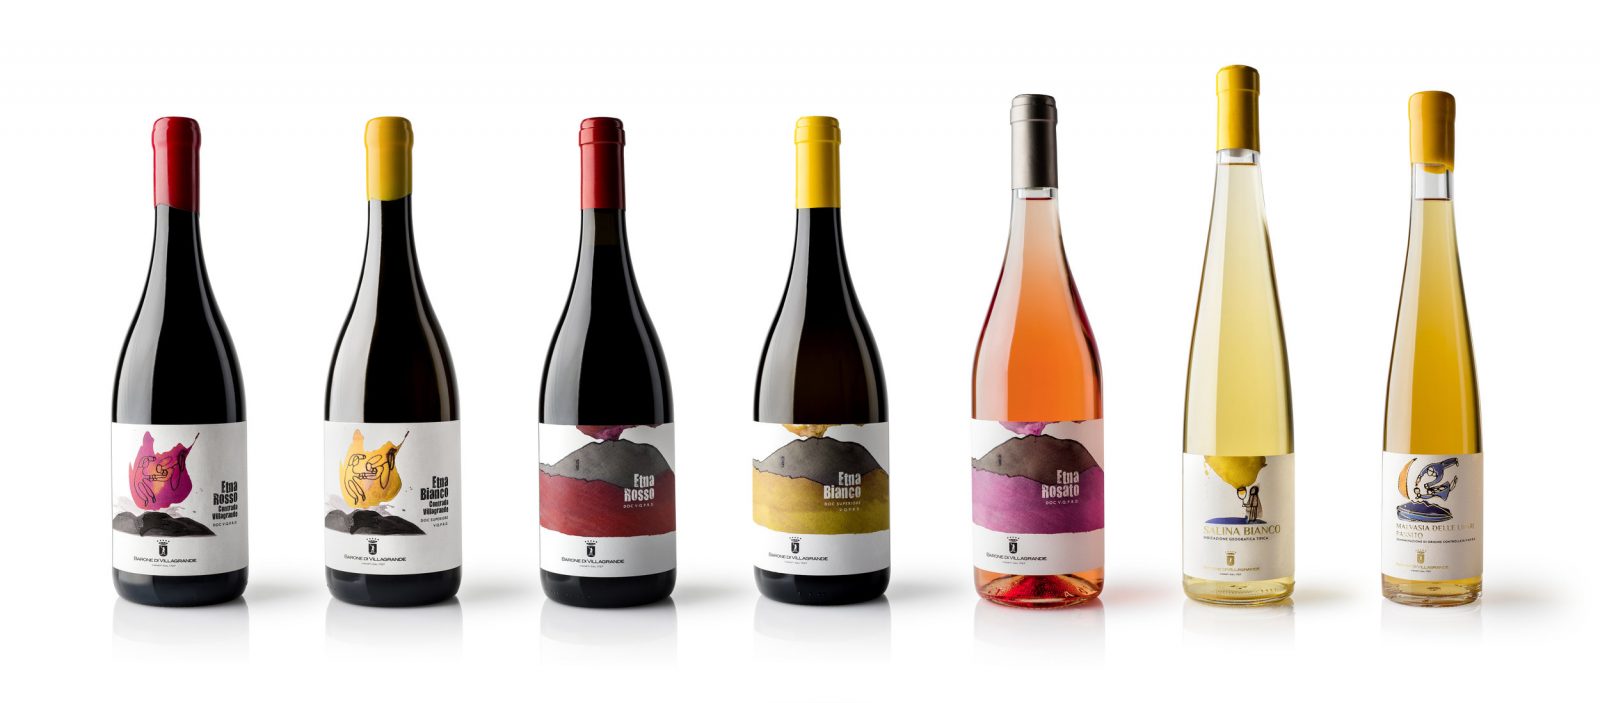 Packaging Labels Design for Italian Winery